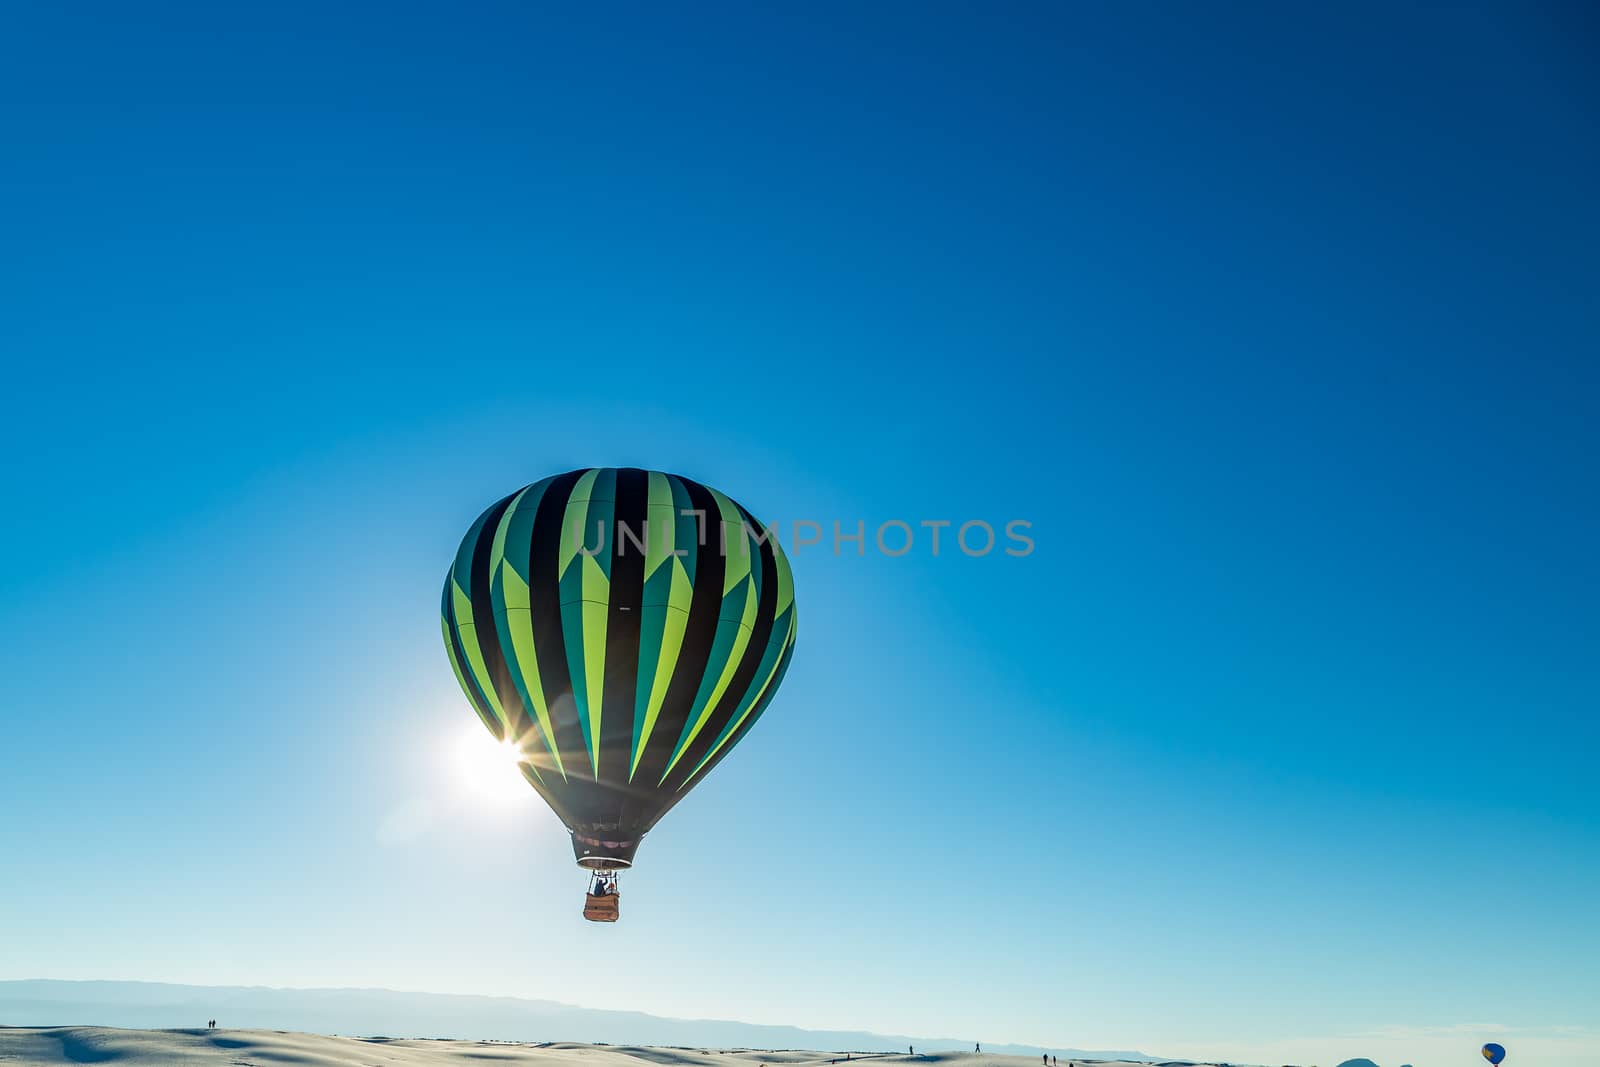 White Sands Balloon Invitational 2016 by adifferentbrian